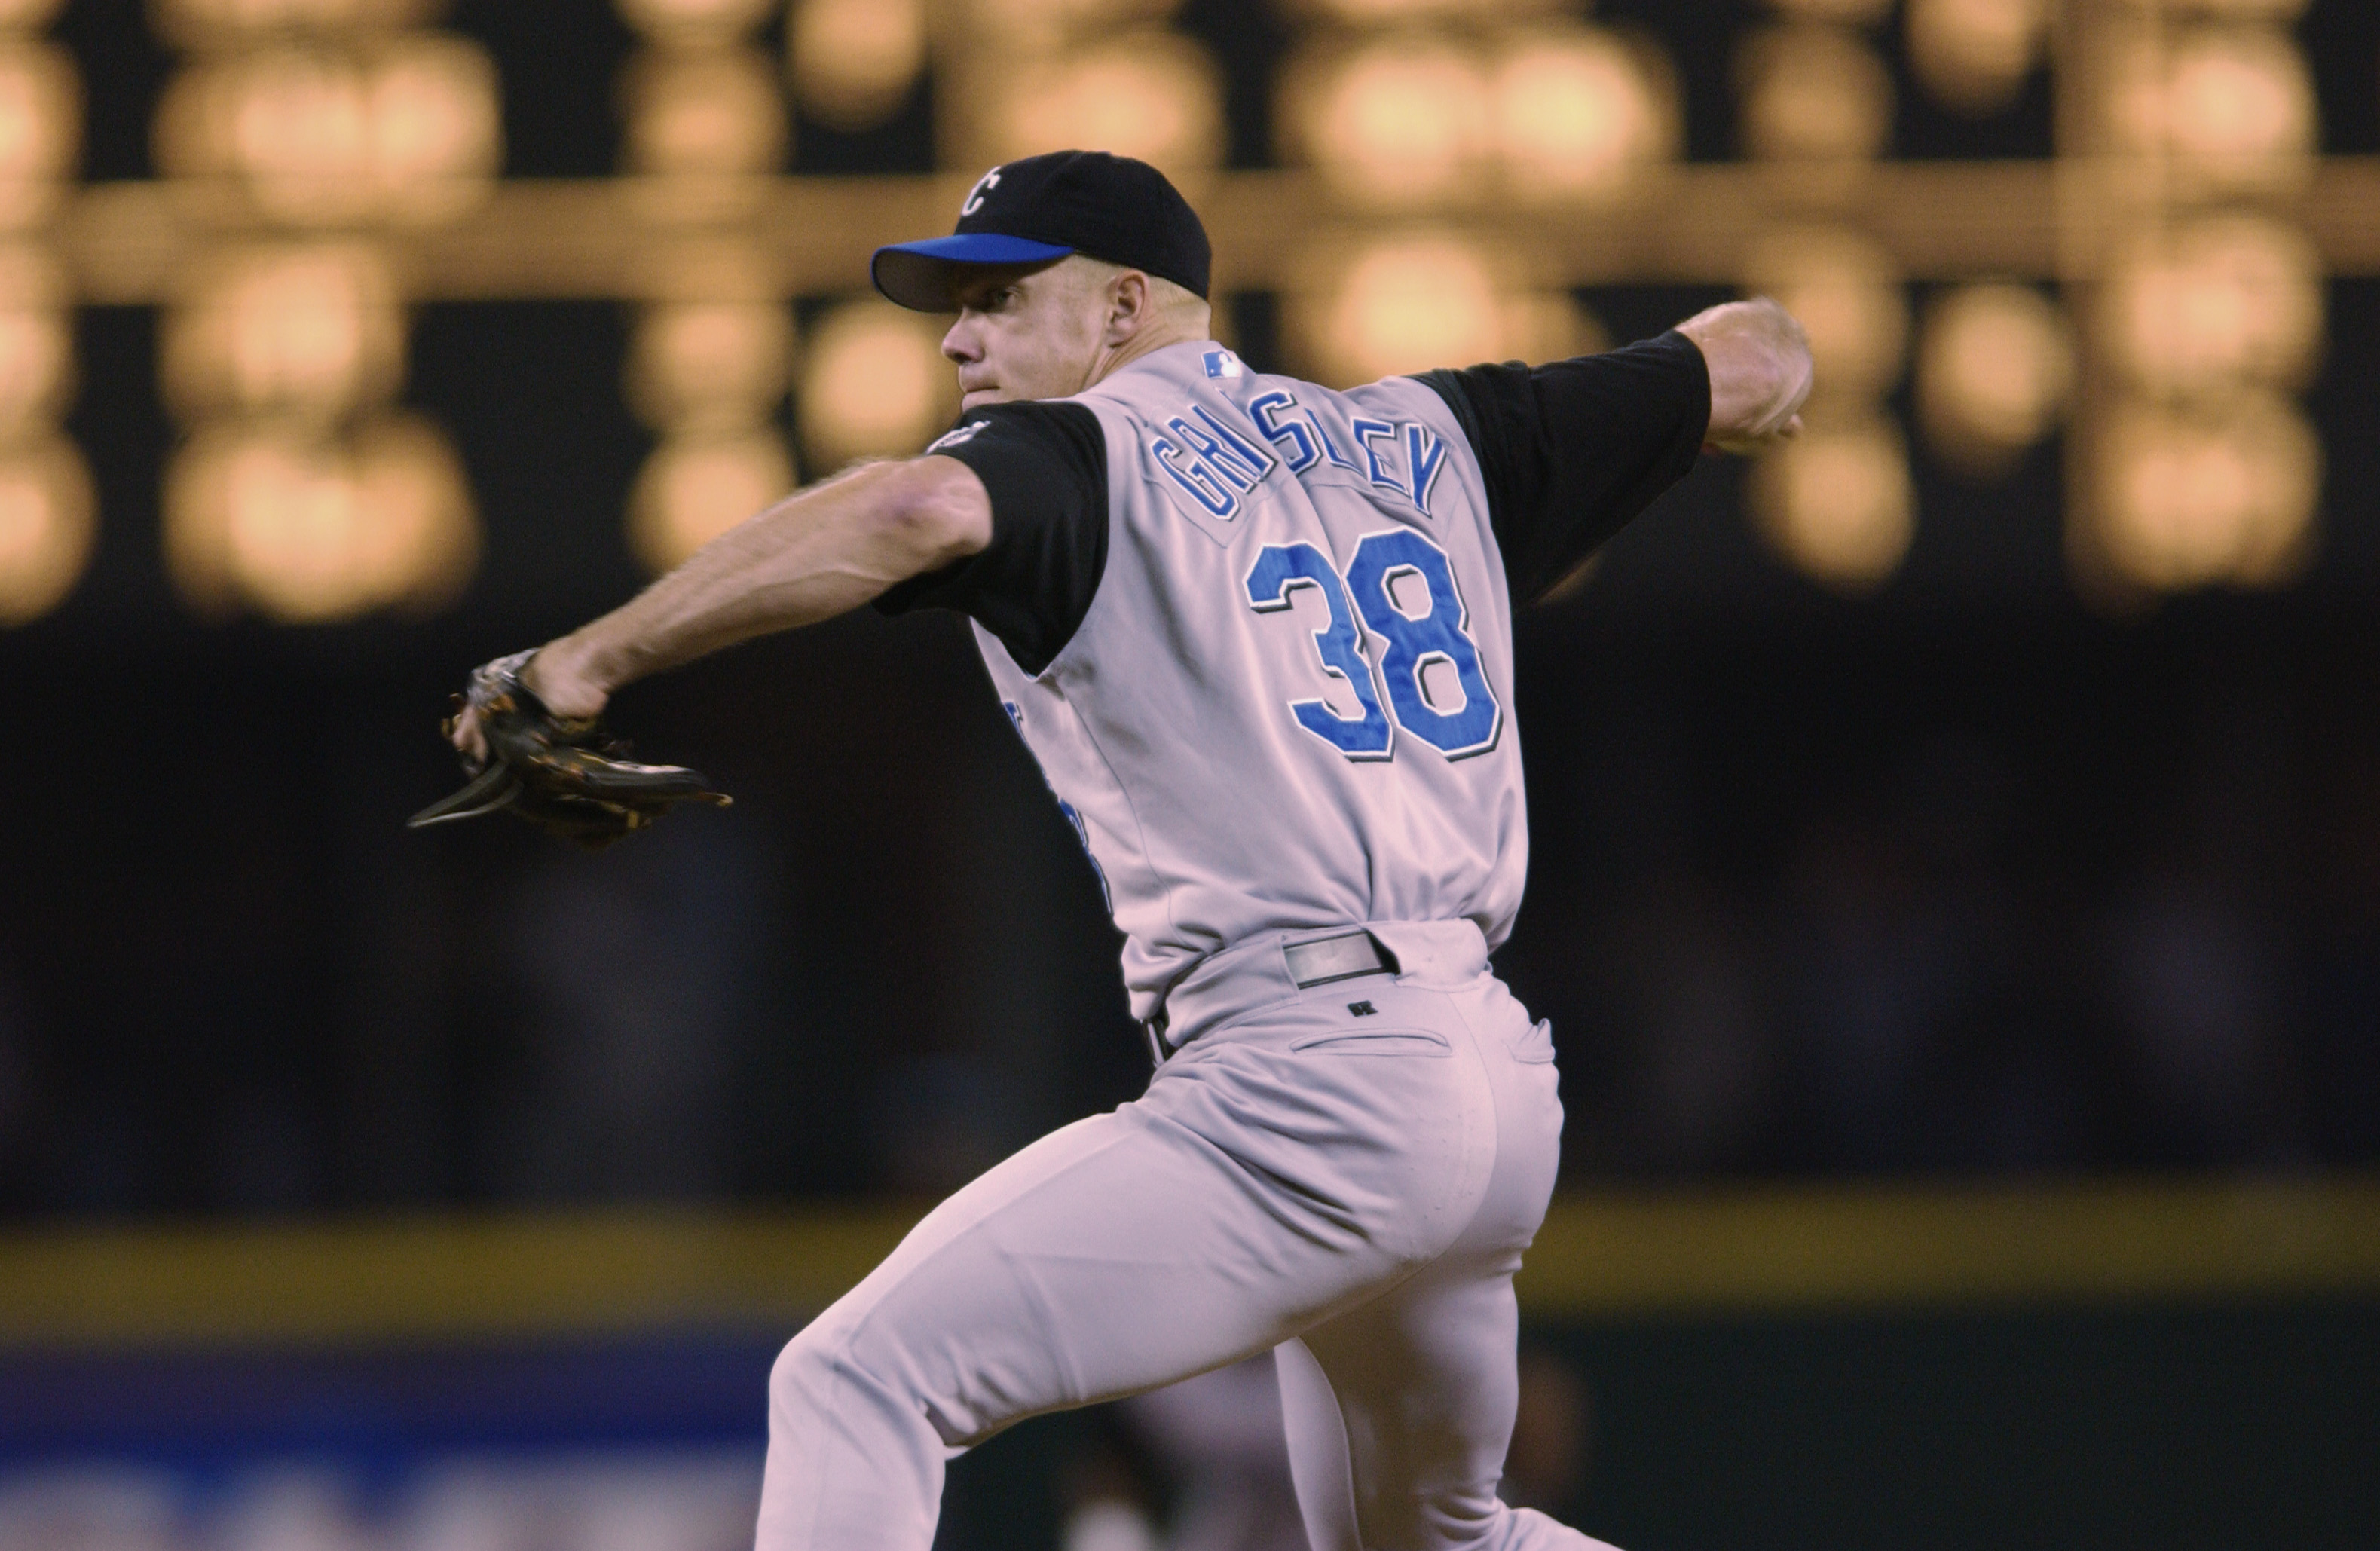 SEATTLE - AUGUST 30:  Pitcher Jason Grimsley #38 of the Kansas City Royals throws a pitch during the MLB game against the Seattle Mariners on August 30, 2002 at Safeco Field in Seattle, Washington.  The Royals defeated Mariners 5-1.  (Photo by Otto Greule